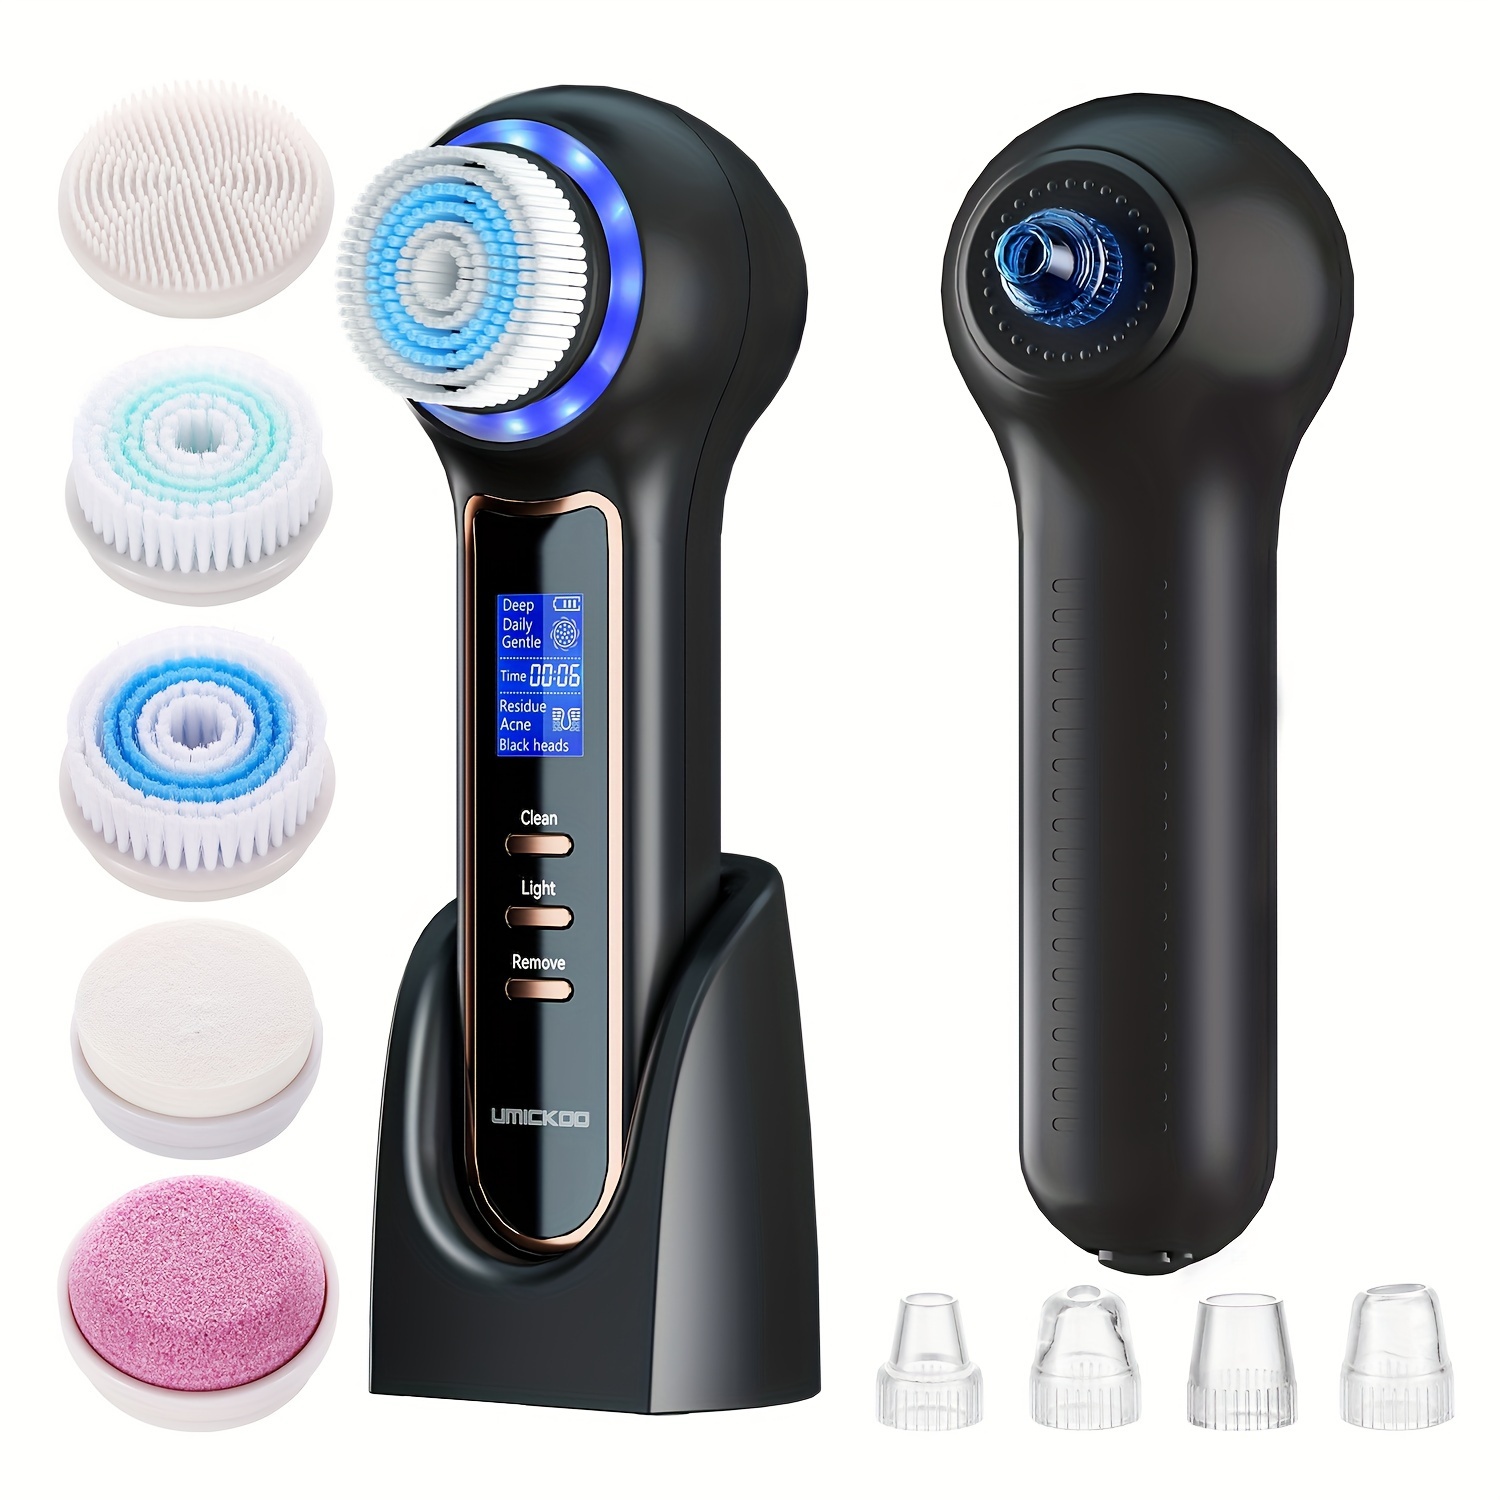 

Scrubber Exfoliator With Lcd Screen Rechargeable Facial Cleansing Brush Ipx7 Waterproof 3 In 1 Remover Vacuum For Exfoliating Deep Pore Cleansing